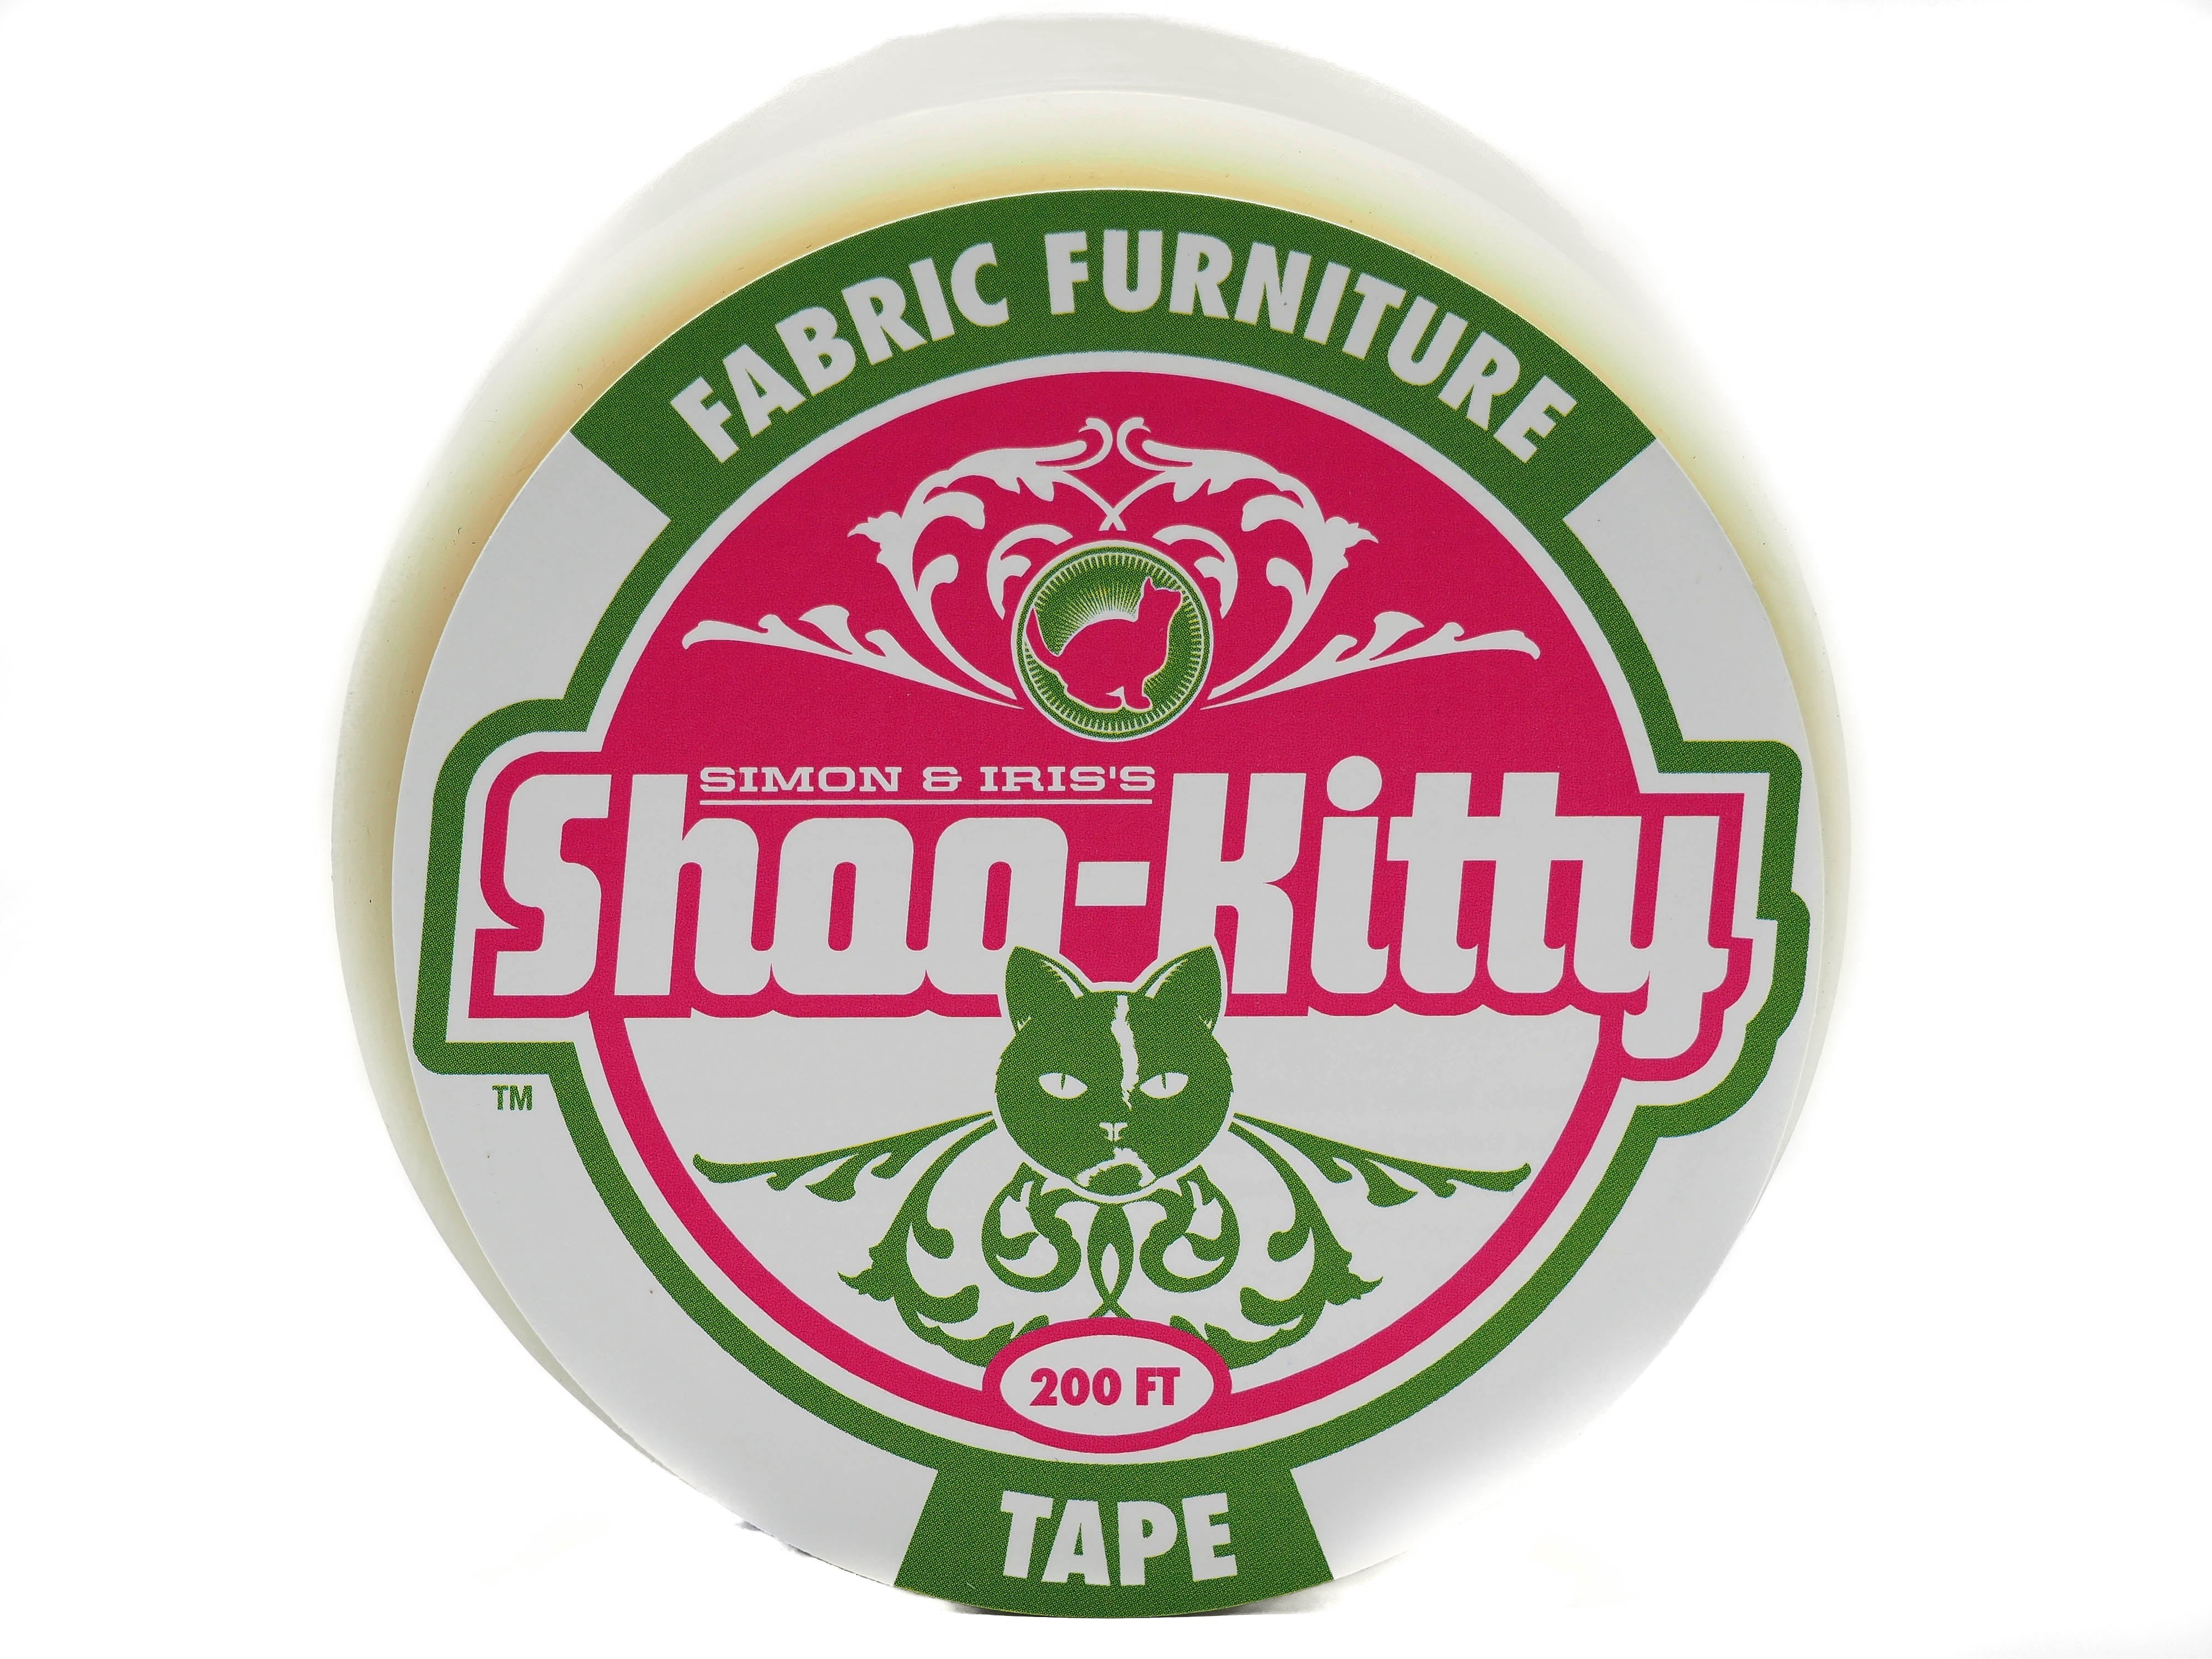 Fabric upholstery furniture tape | Cat scratch prevention tape - Shoo-Kitty